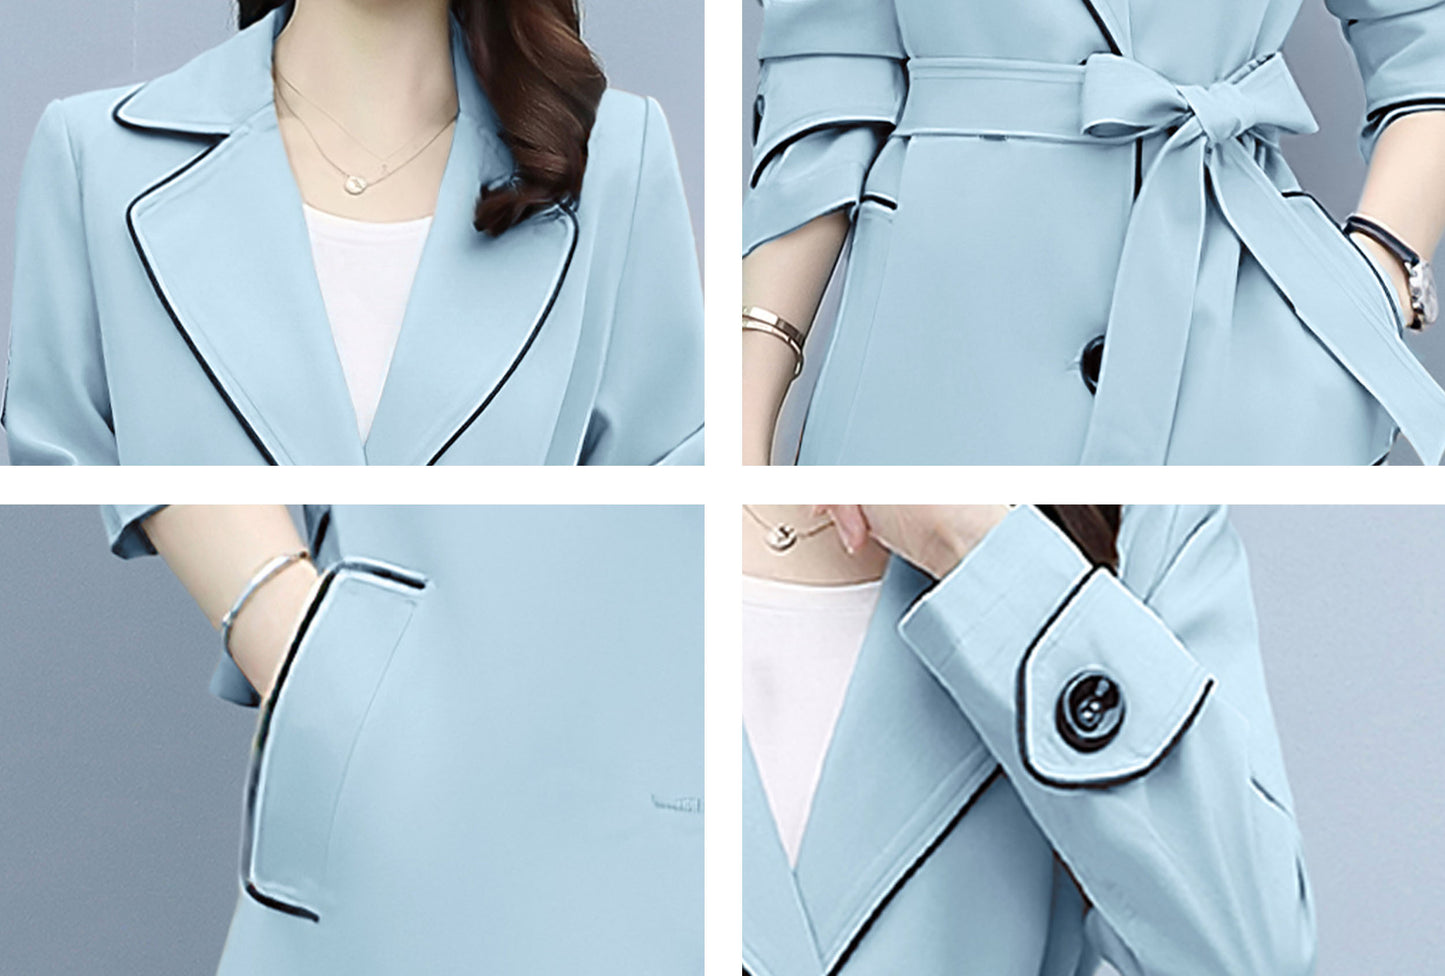 Blue 3/4 Length Outerwear Trench Coat with Belt